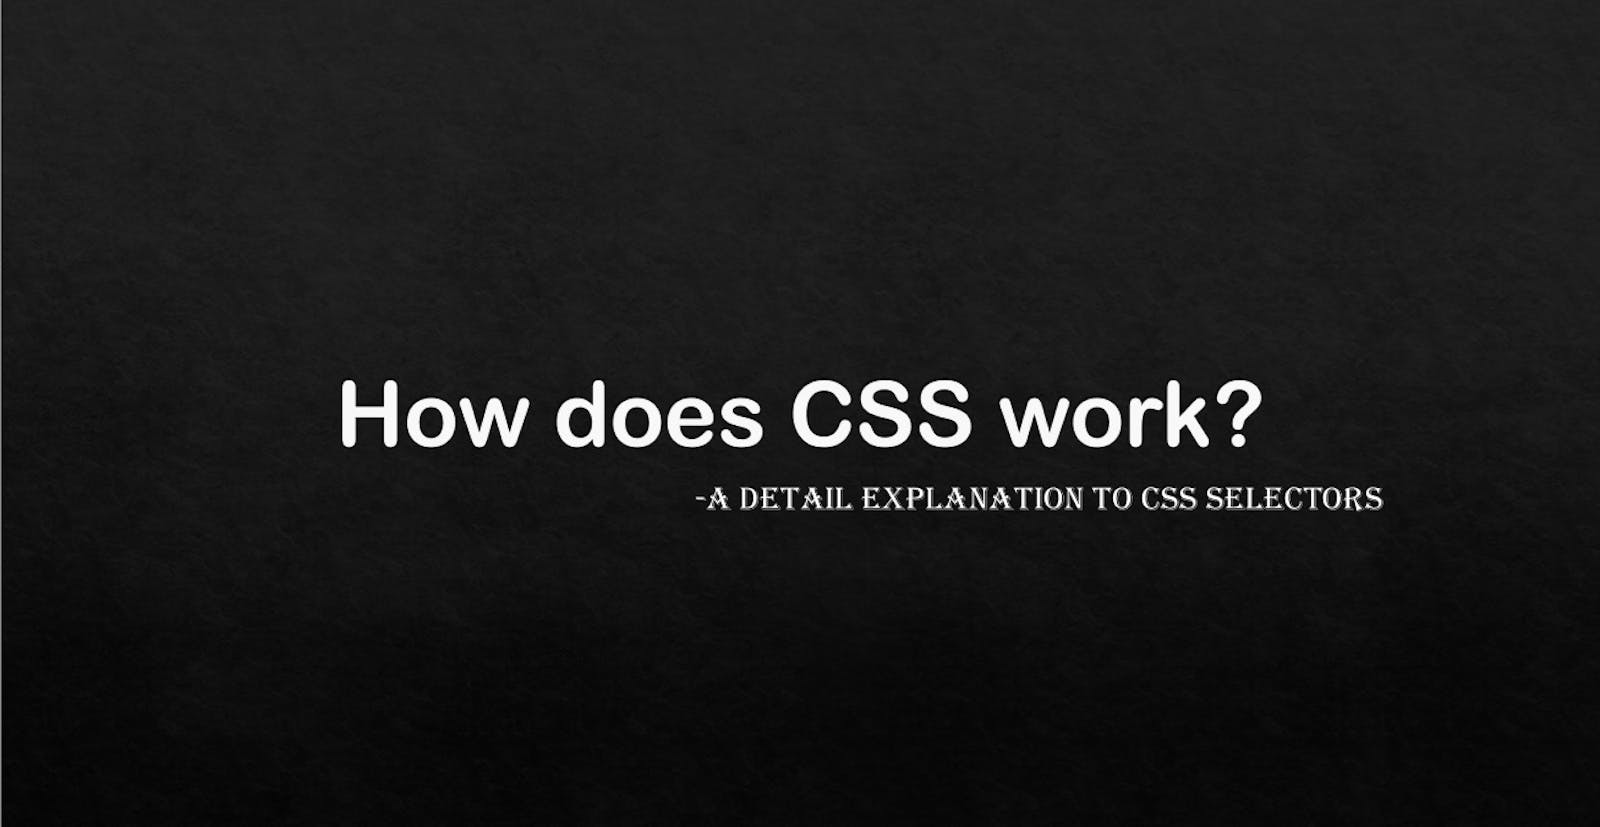 How does CSS work?